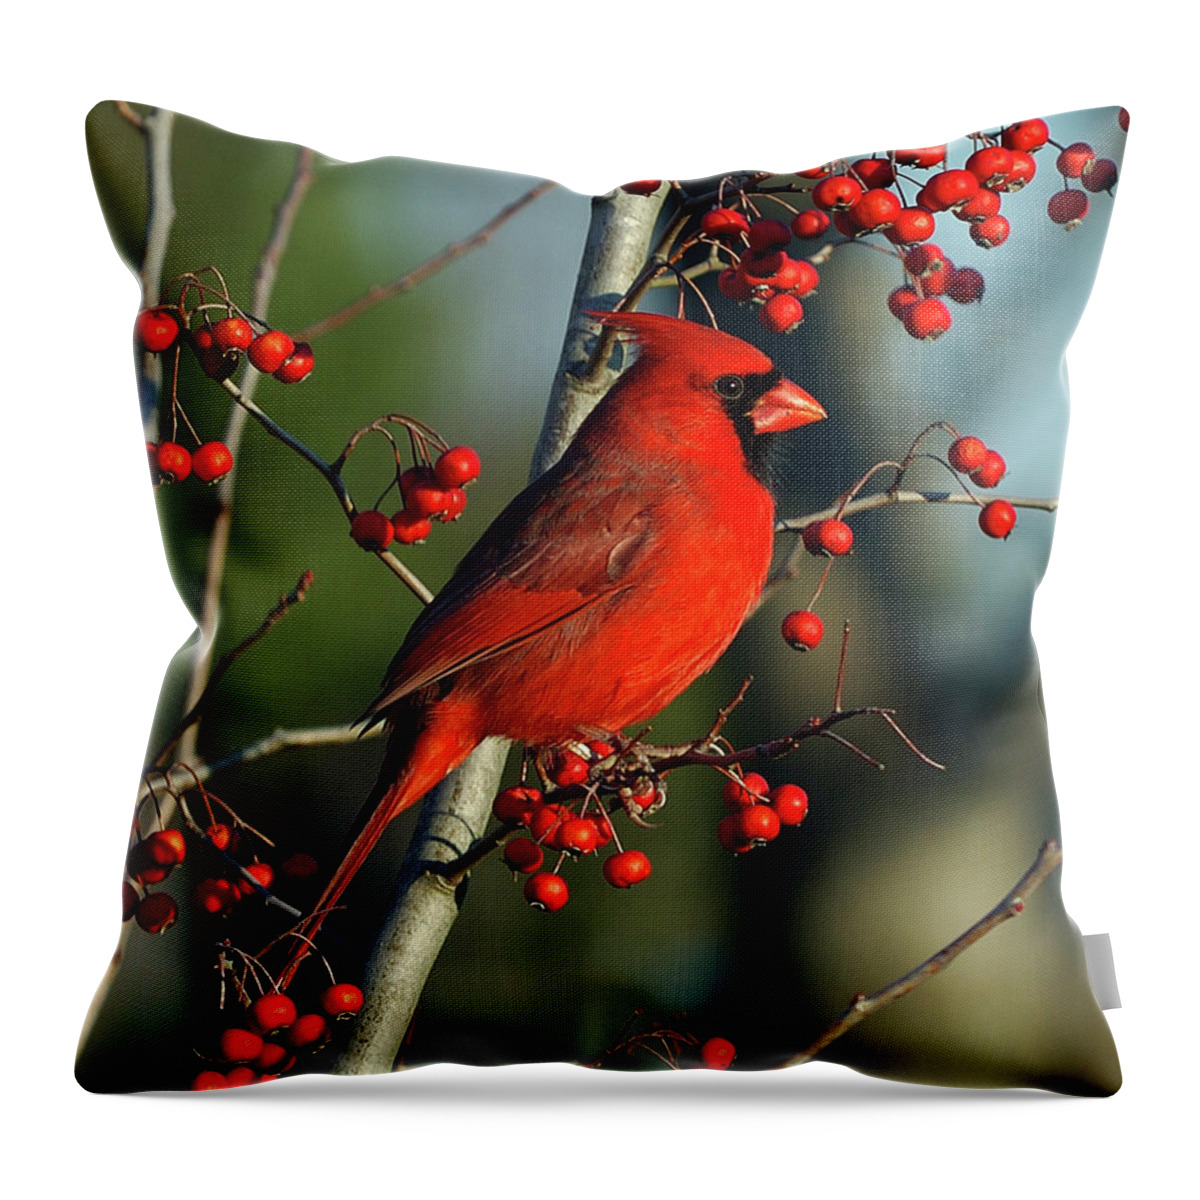 Animal Themes Throw Pillow featuring the photograph Male Cardinal On Branch by H .h. Fox Photography